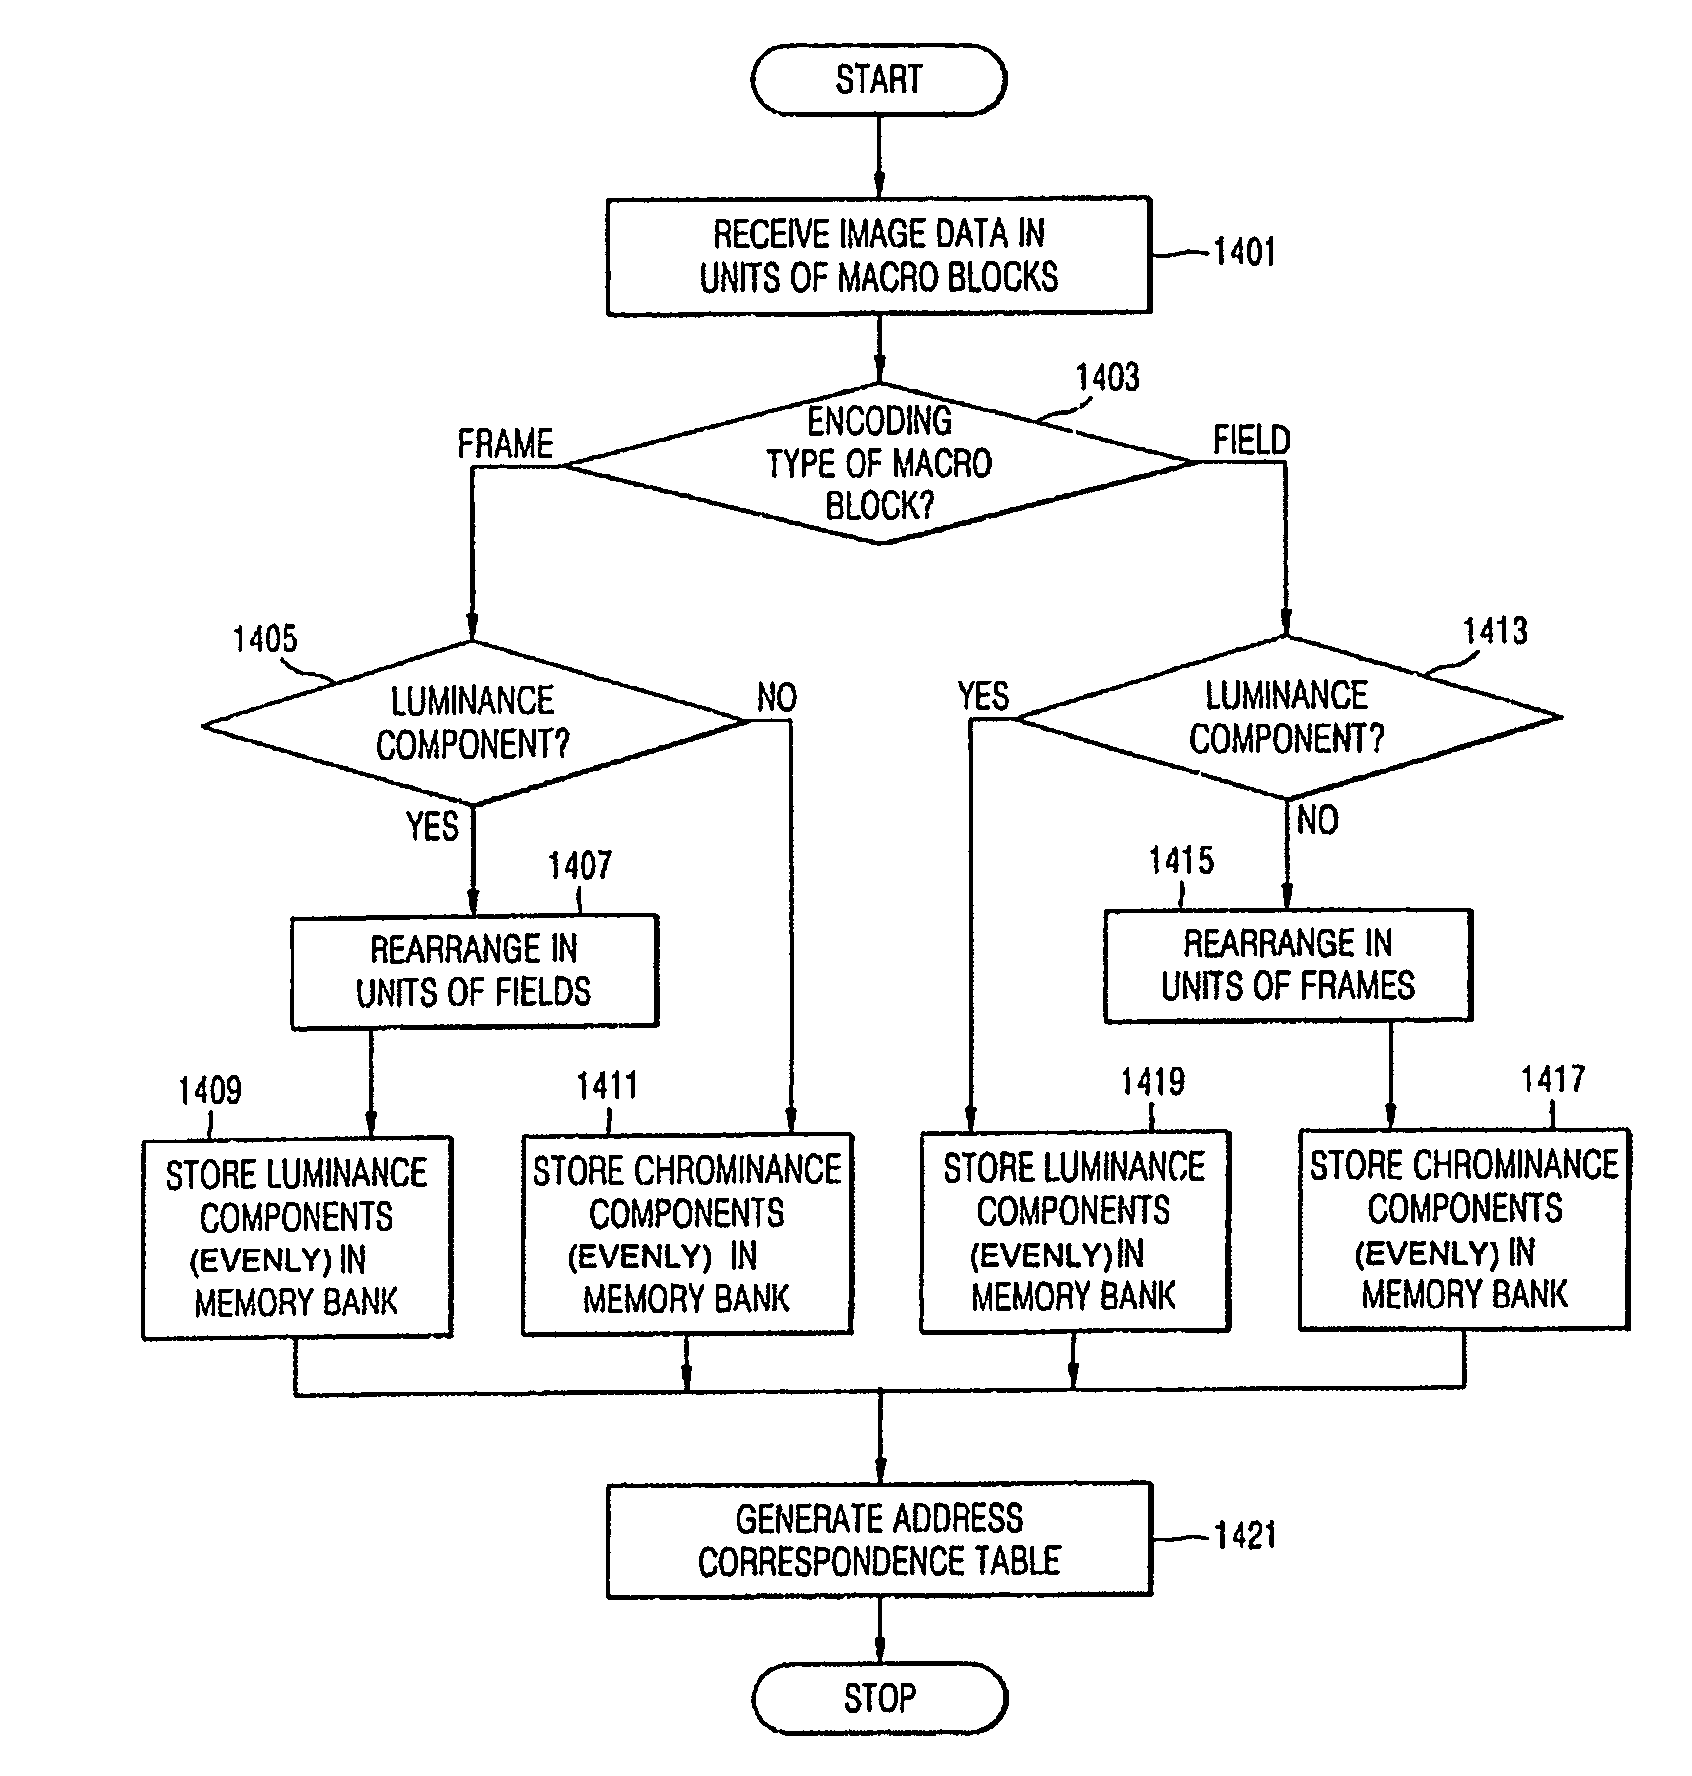 Apparatus and method for controlling data write/read in image processing system